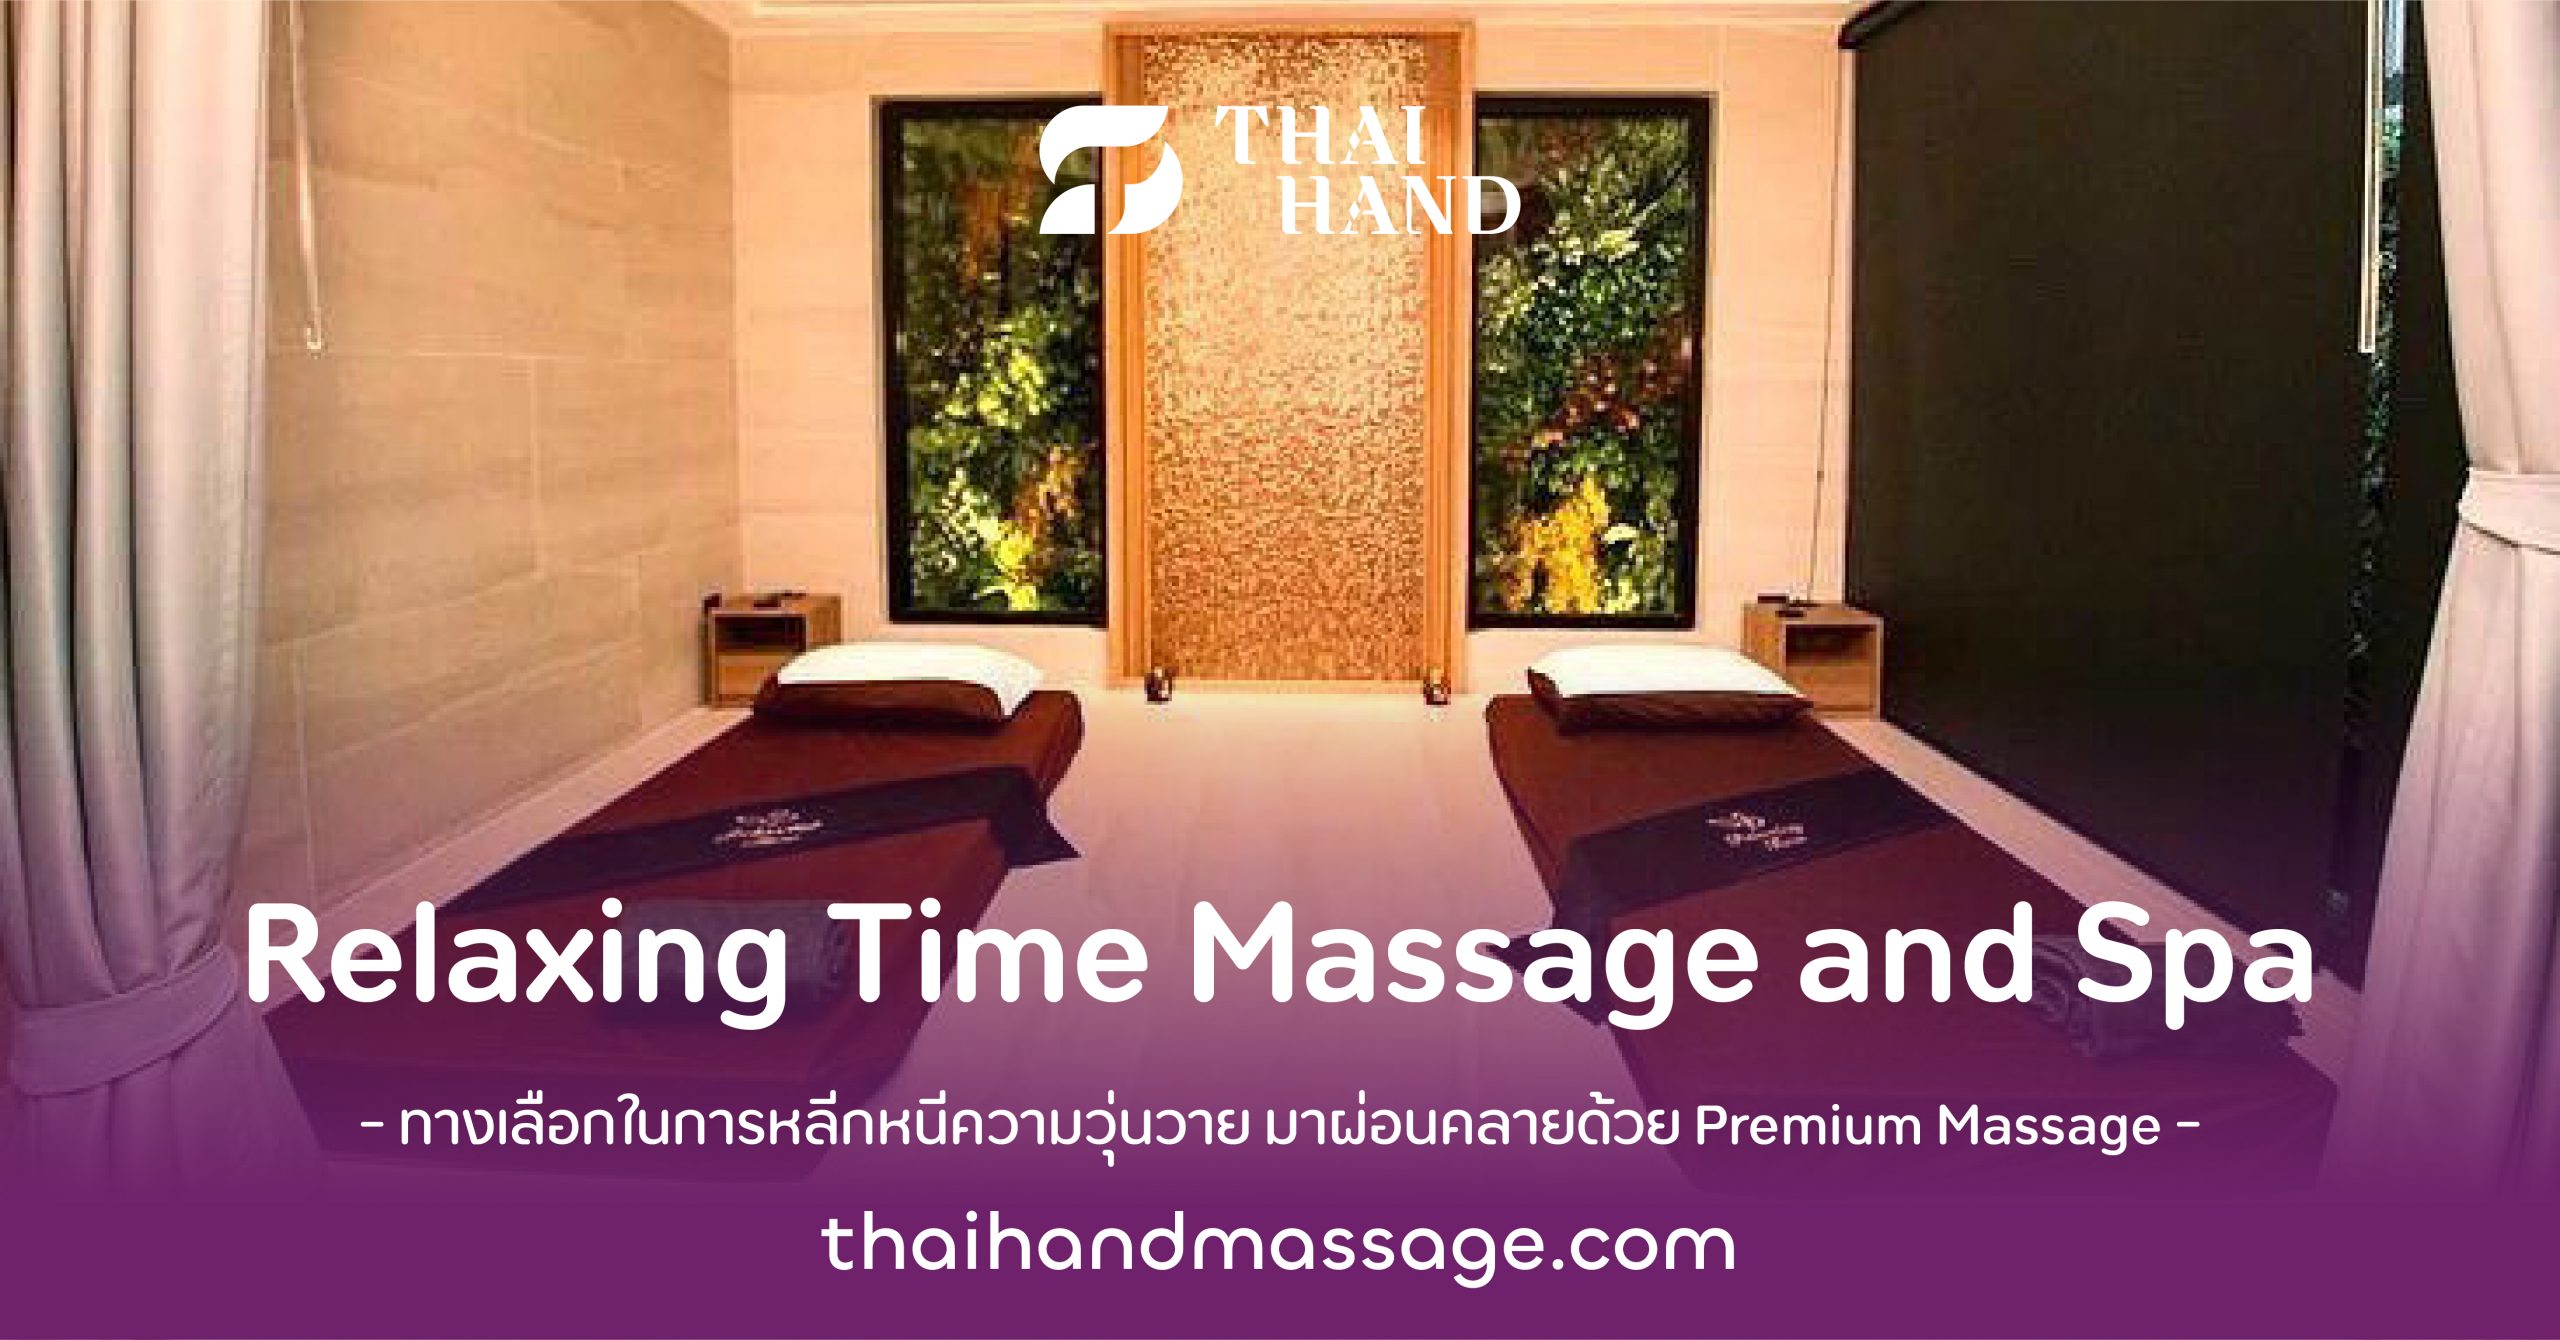 Relaxing Time Massage and Spa